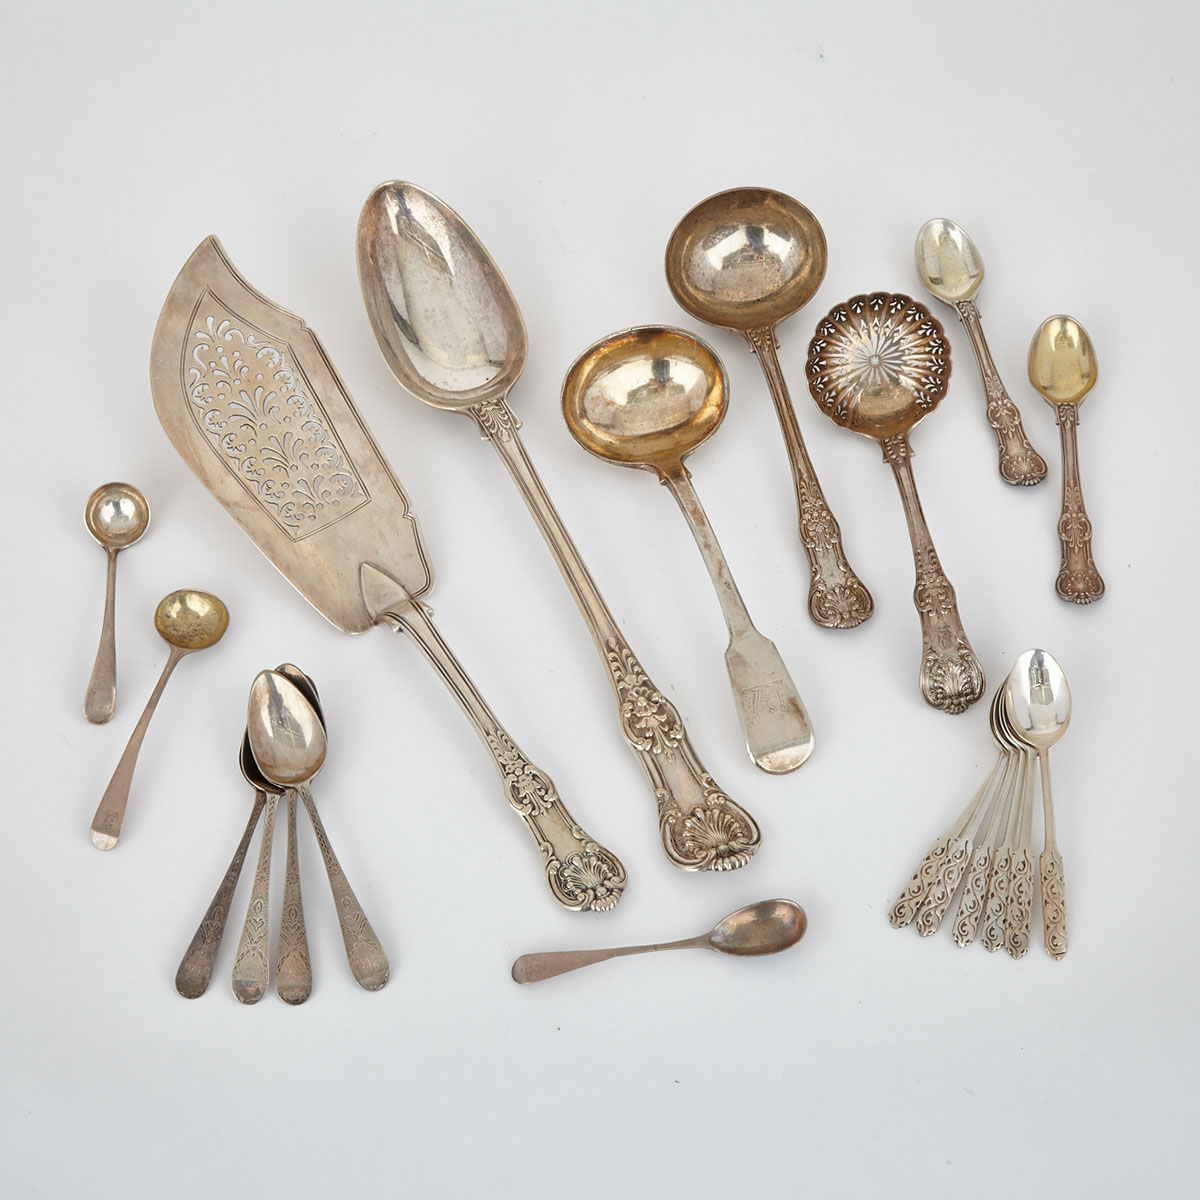 Grouped Lot of George III and Later English Silver Flatware, London and Birmingham, c.1788-1945